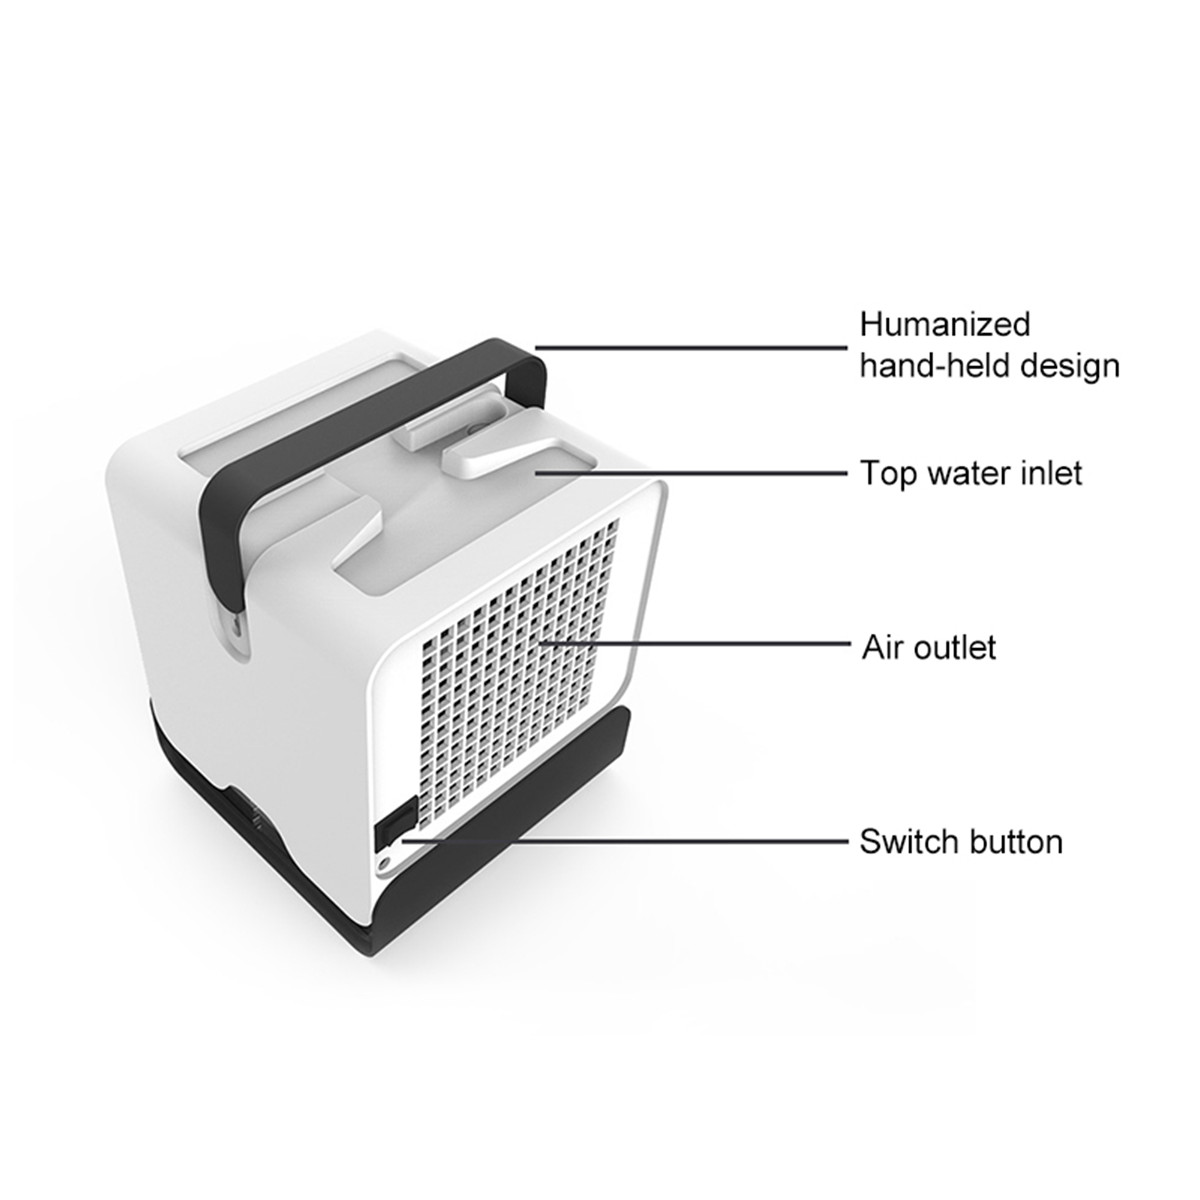 Mini-Portable-Air-Conditioner-Night-Light-Conditioning-Cooler-Humidifier-Purifier-USB-Desktop-Air-Co-1710195-7